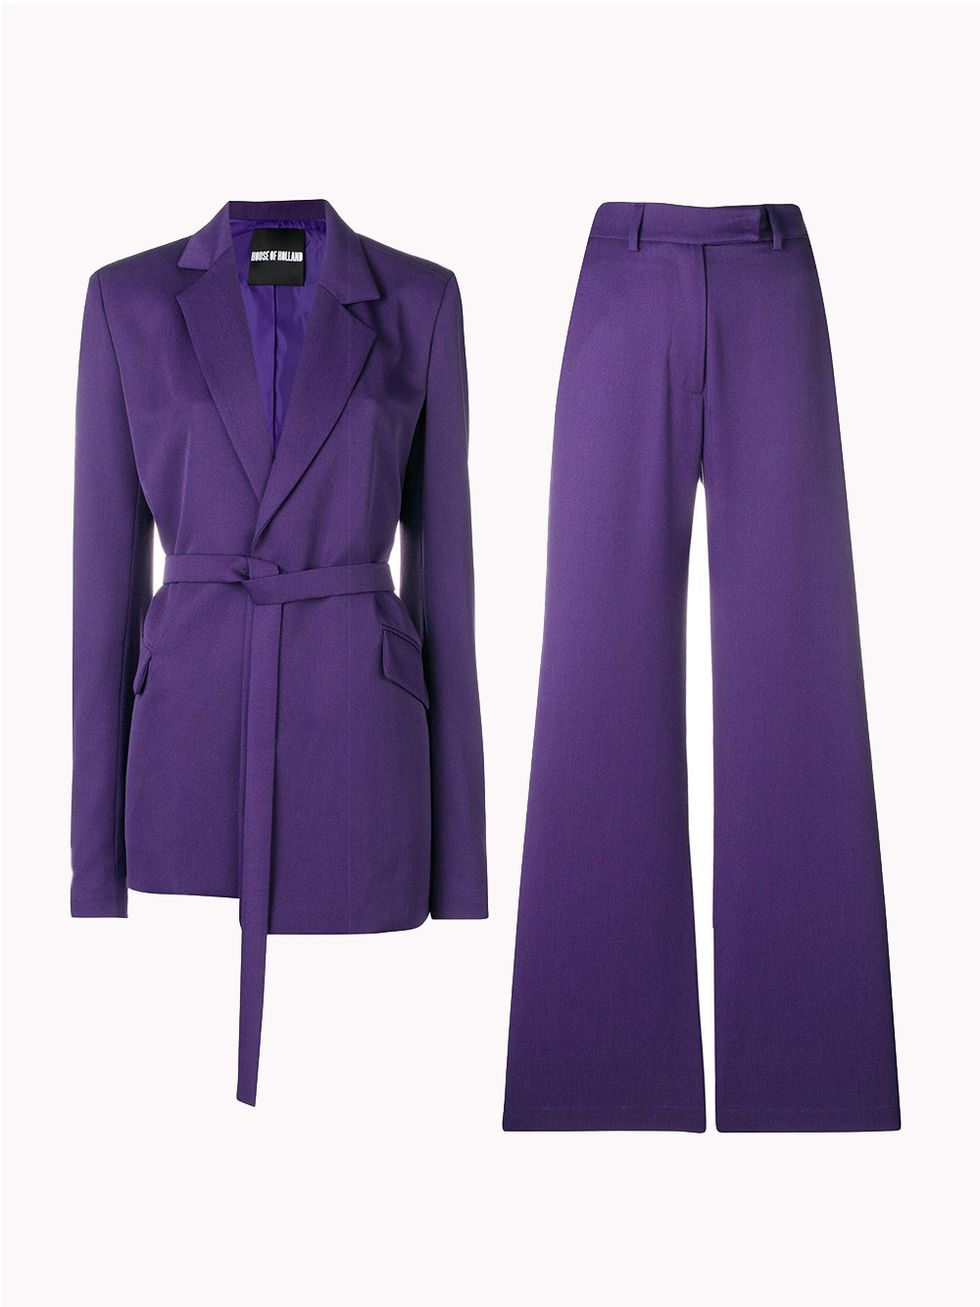 Clothing, Purple, Violet, Outerwear, Coat, Sleeve, Suit, Trench coat, Collar, Trousers, 